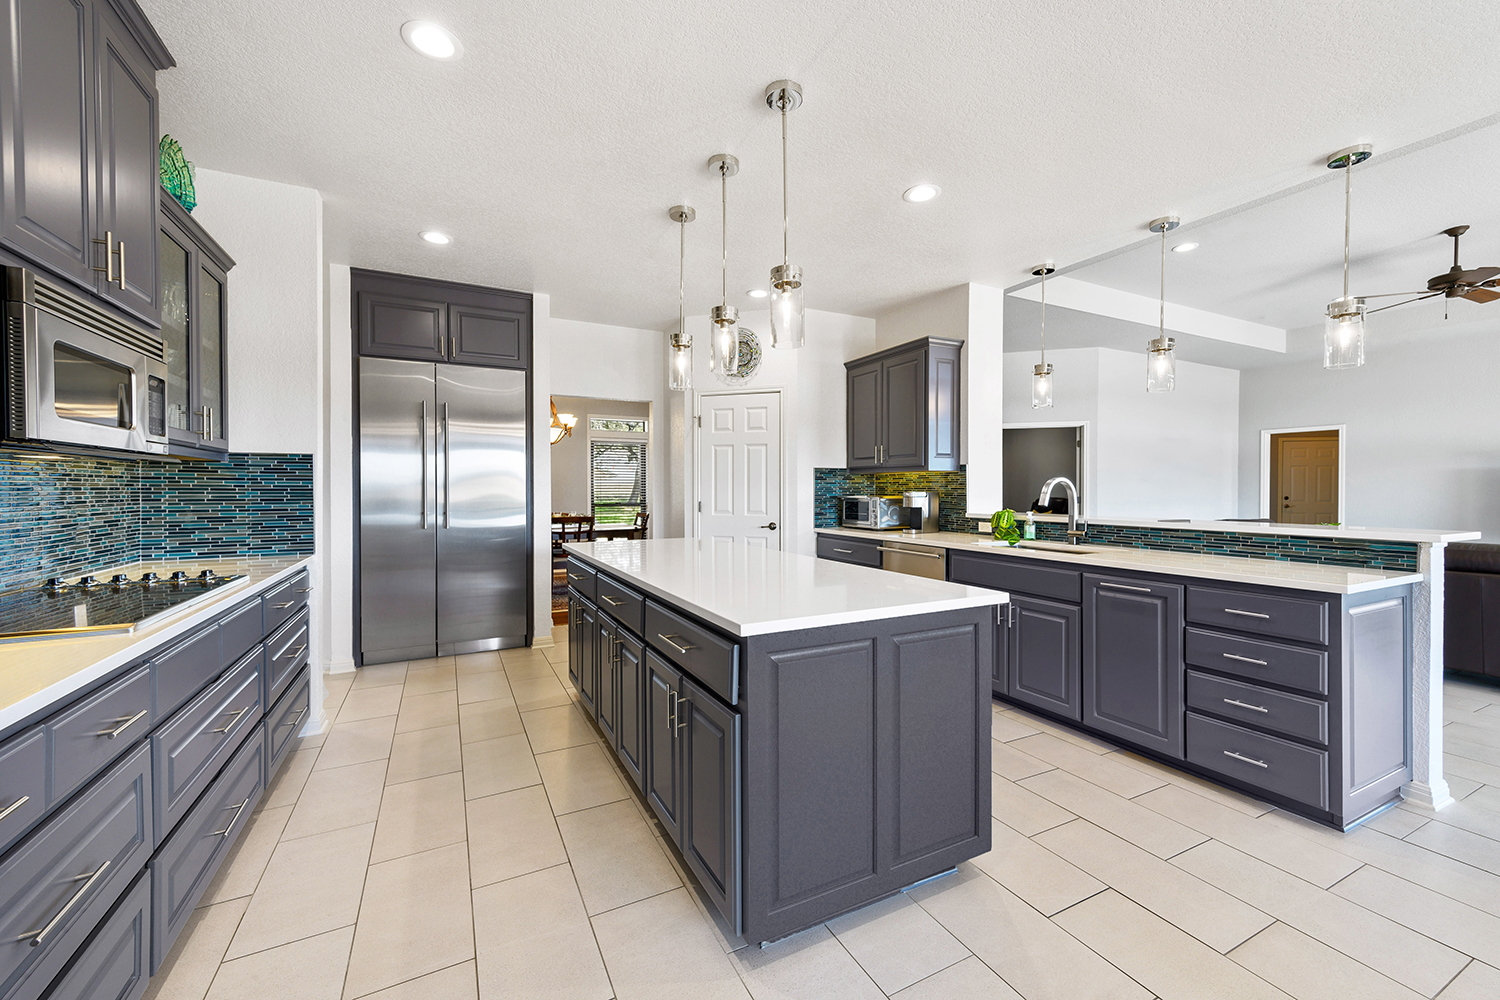 residential kitchen painted white walls painted dark gray cabinets interior painting